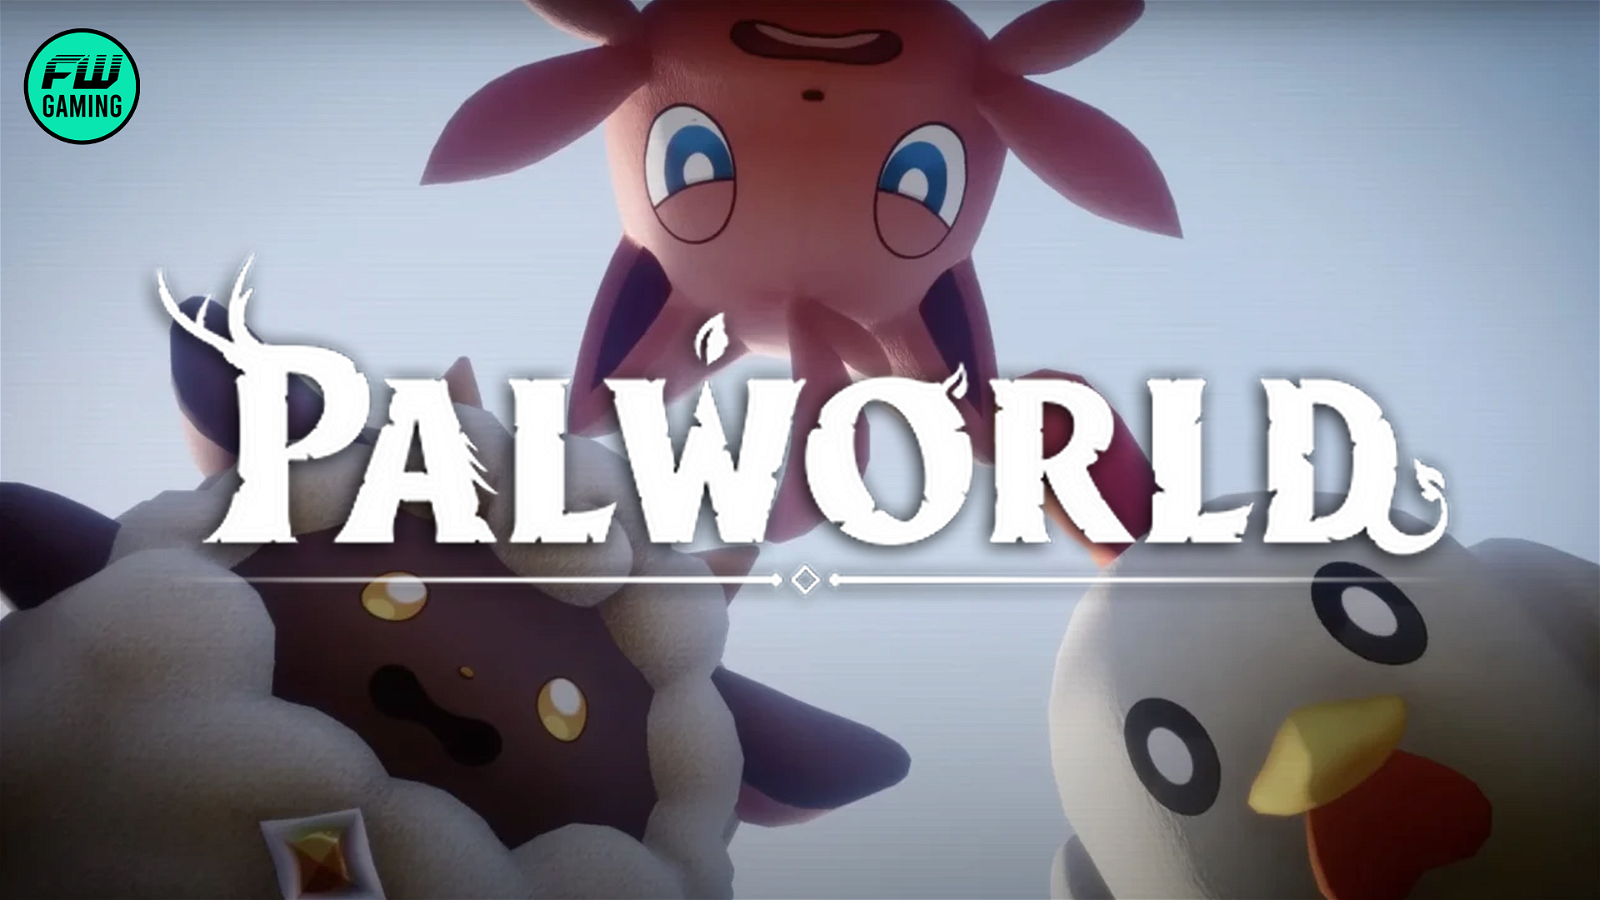 Palworld continues to break records on Steam. But there's still one achievement it has yet to claim.